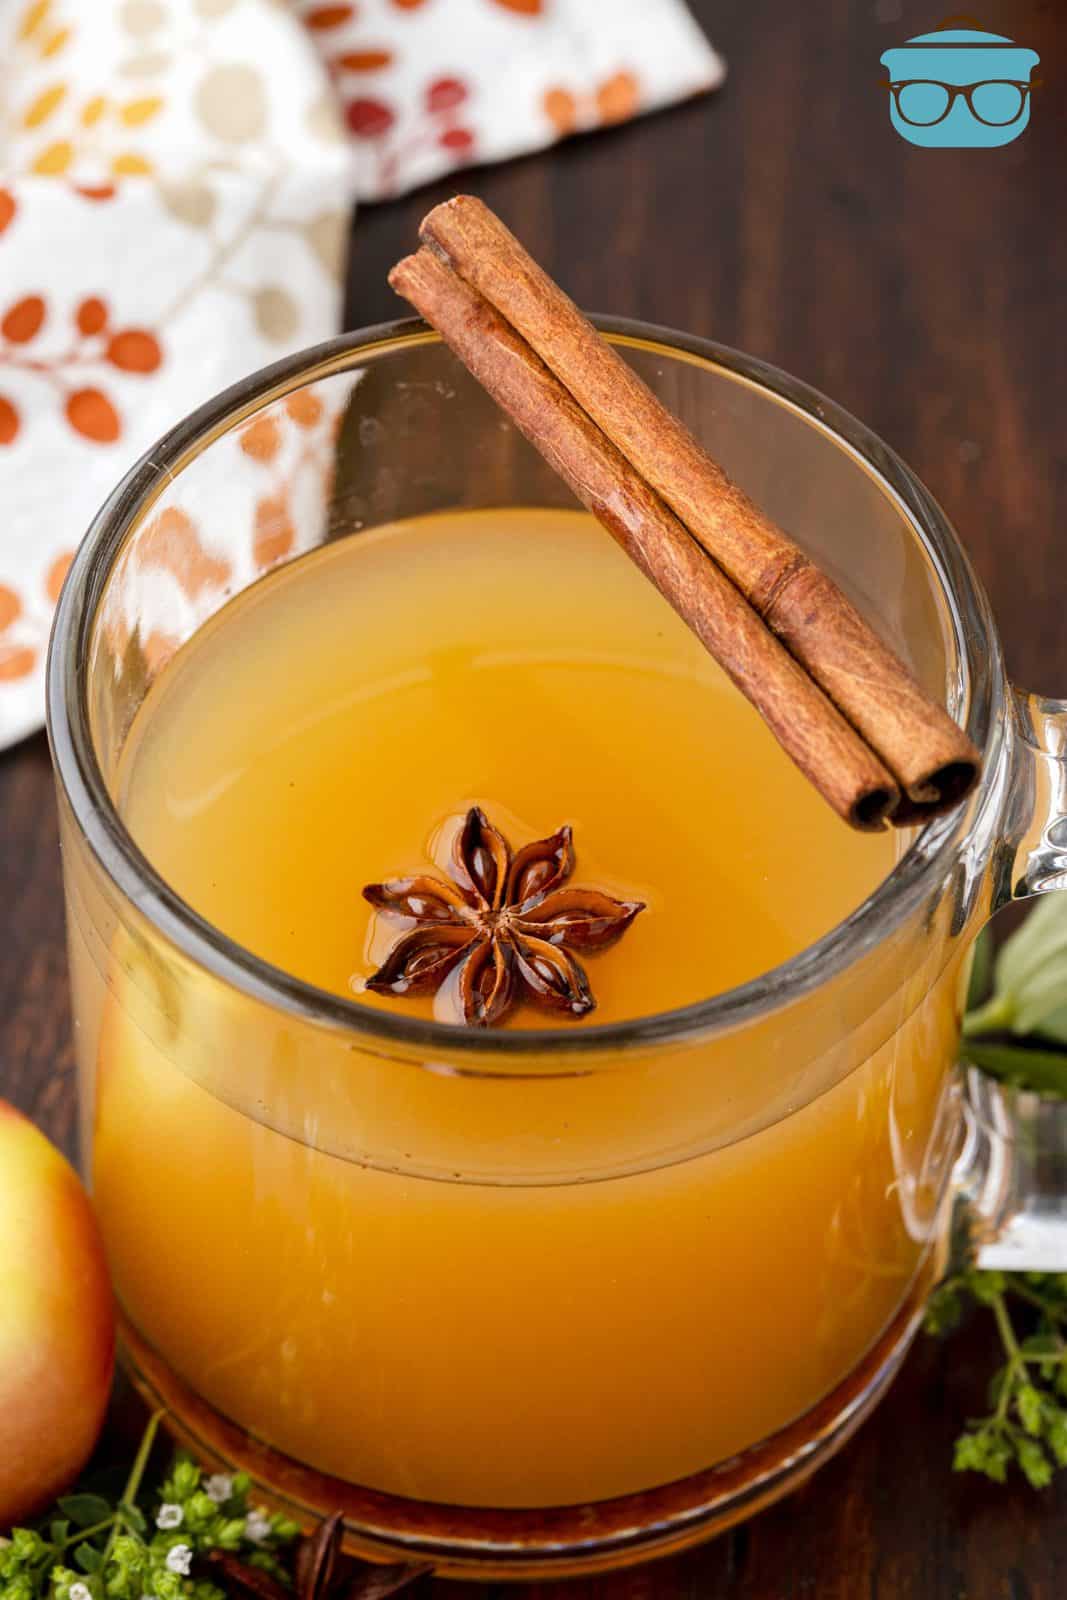 Warm Apple Cider Cocktail in glass with star anise and cinnamon stick on rim.